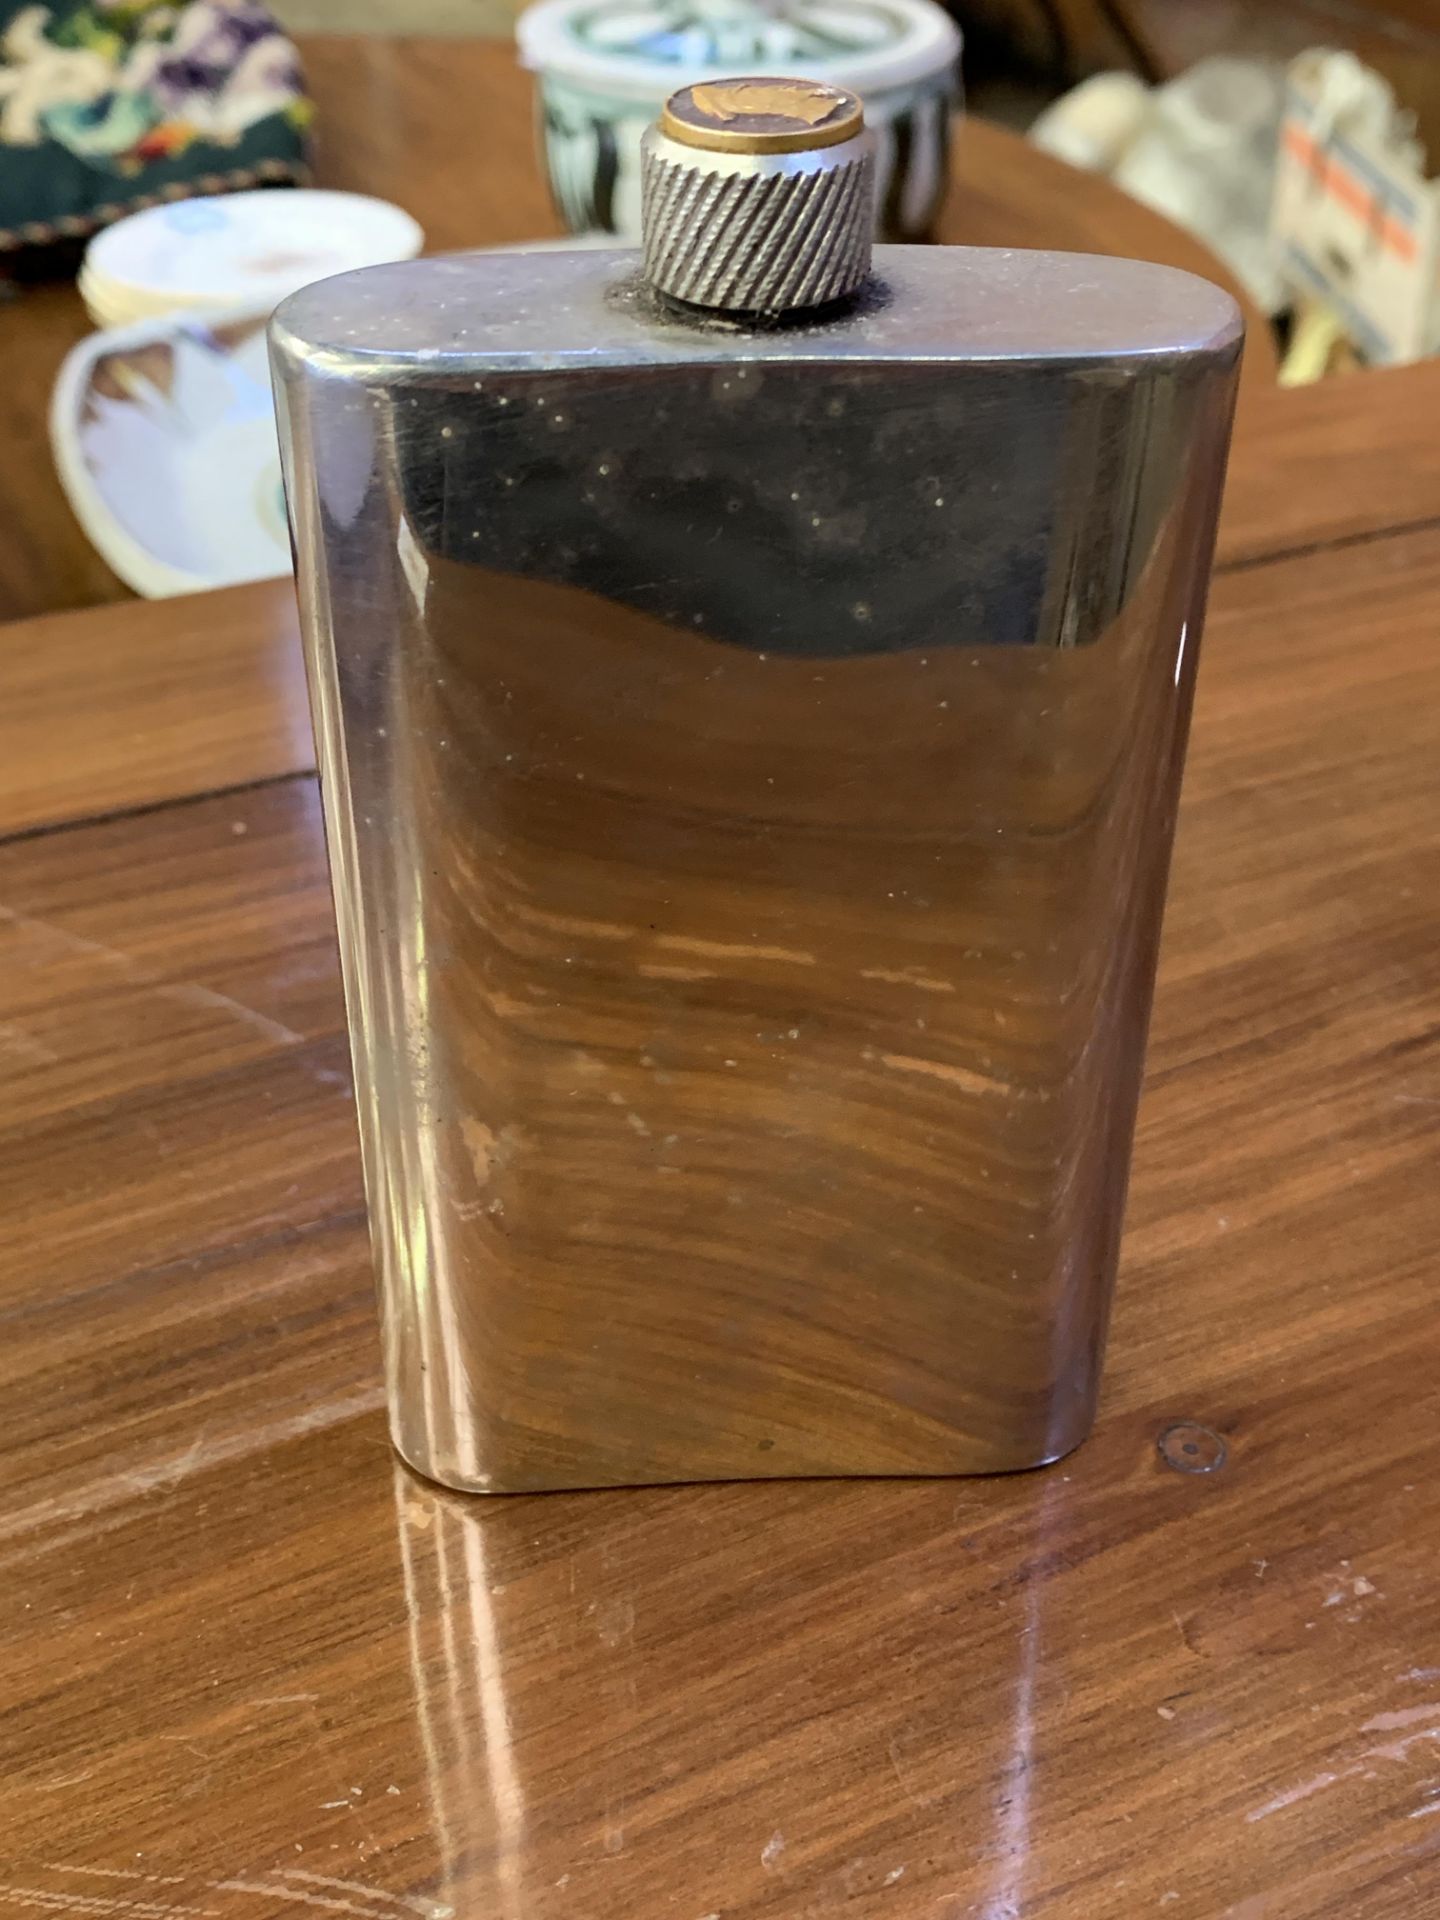 USSR stainless steel hip flask - Image 4 of 4